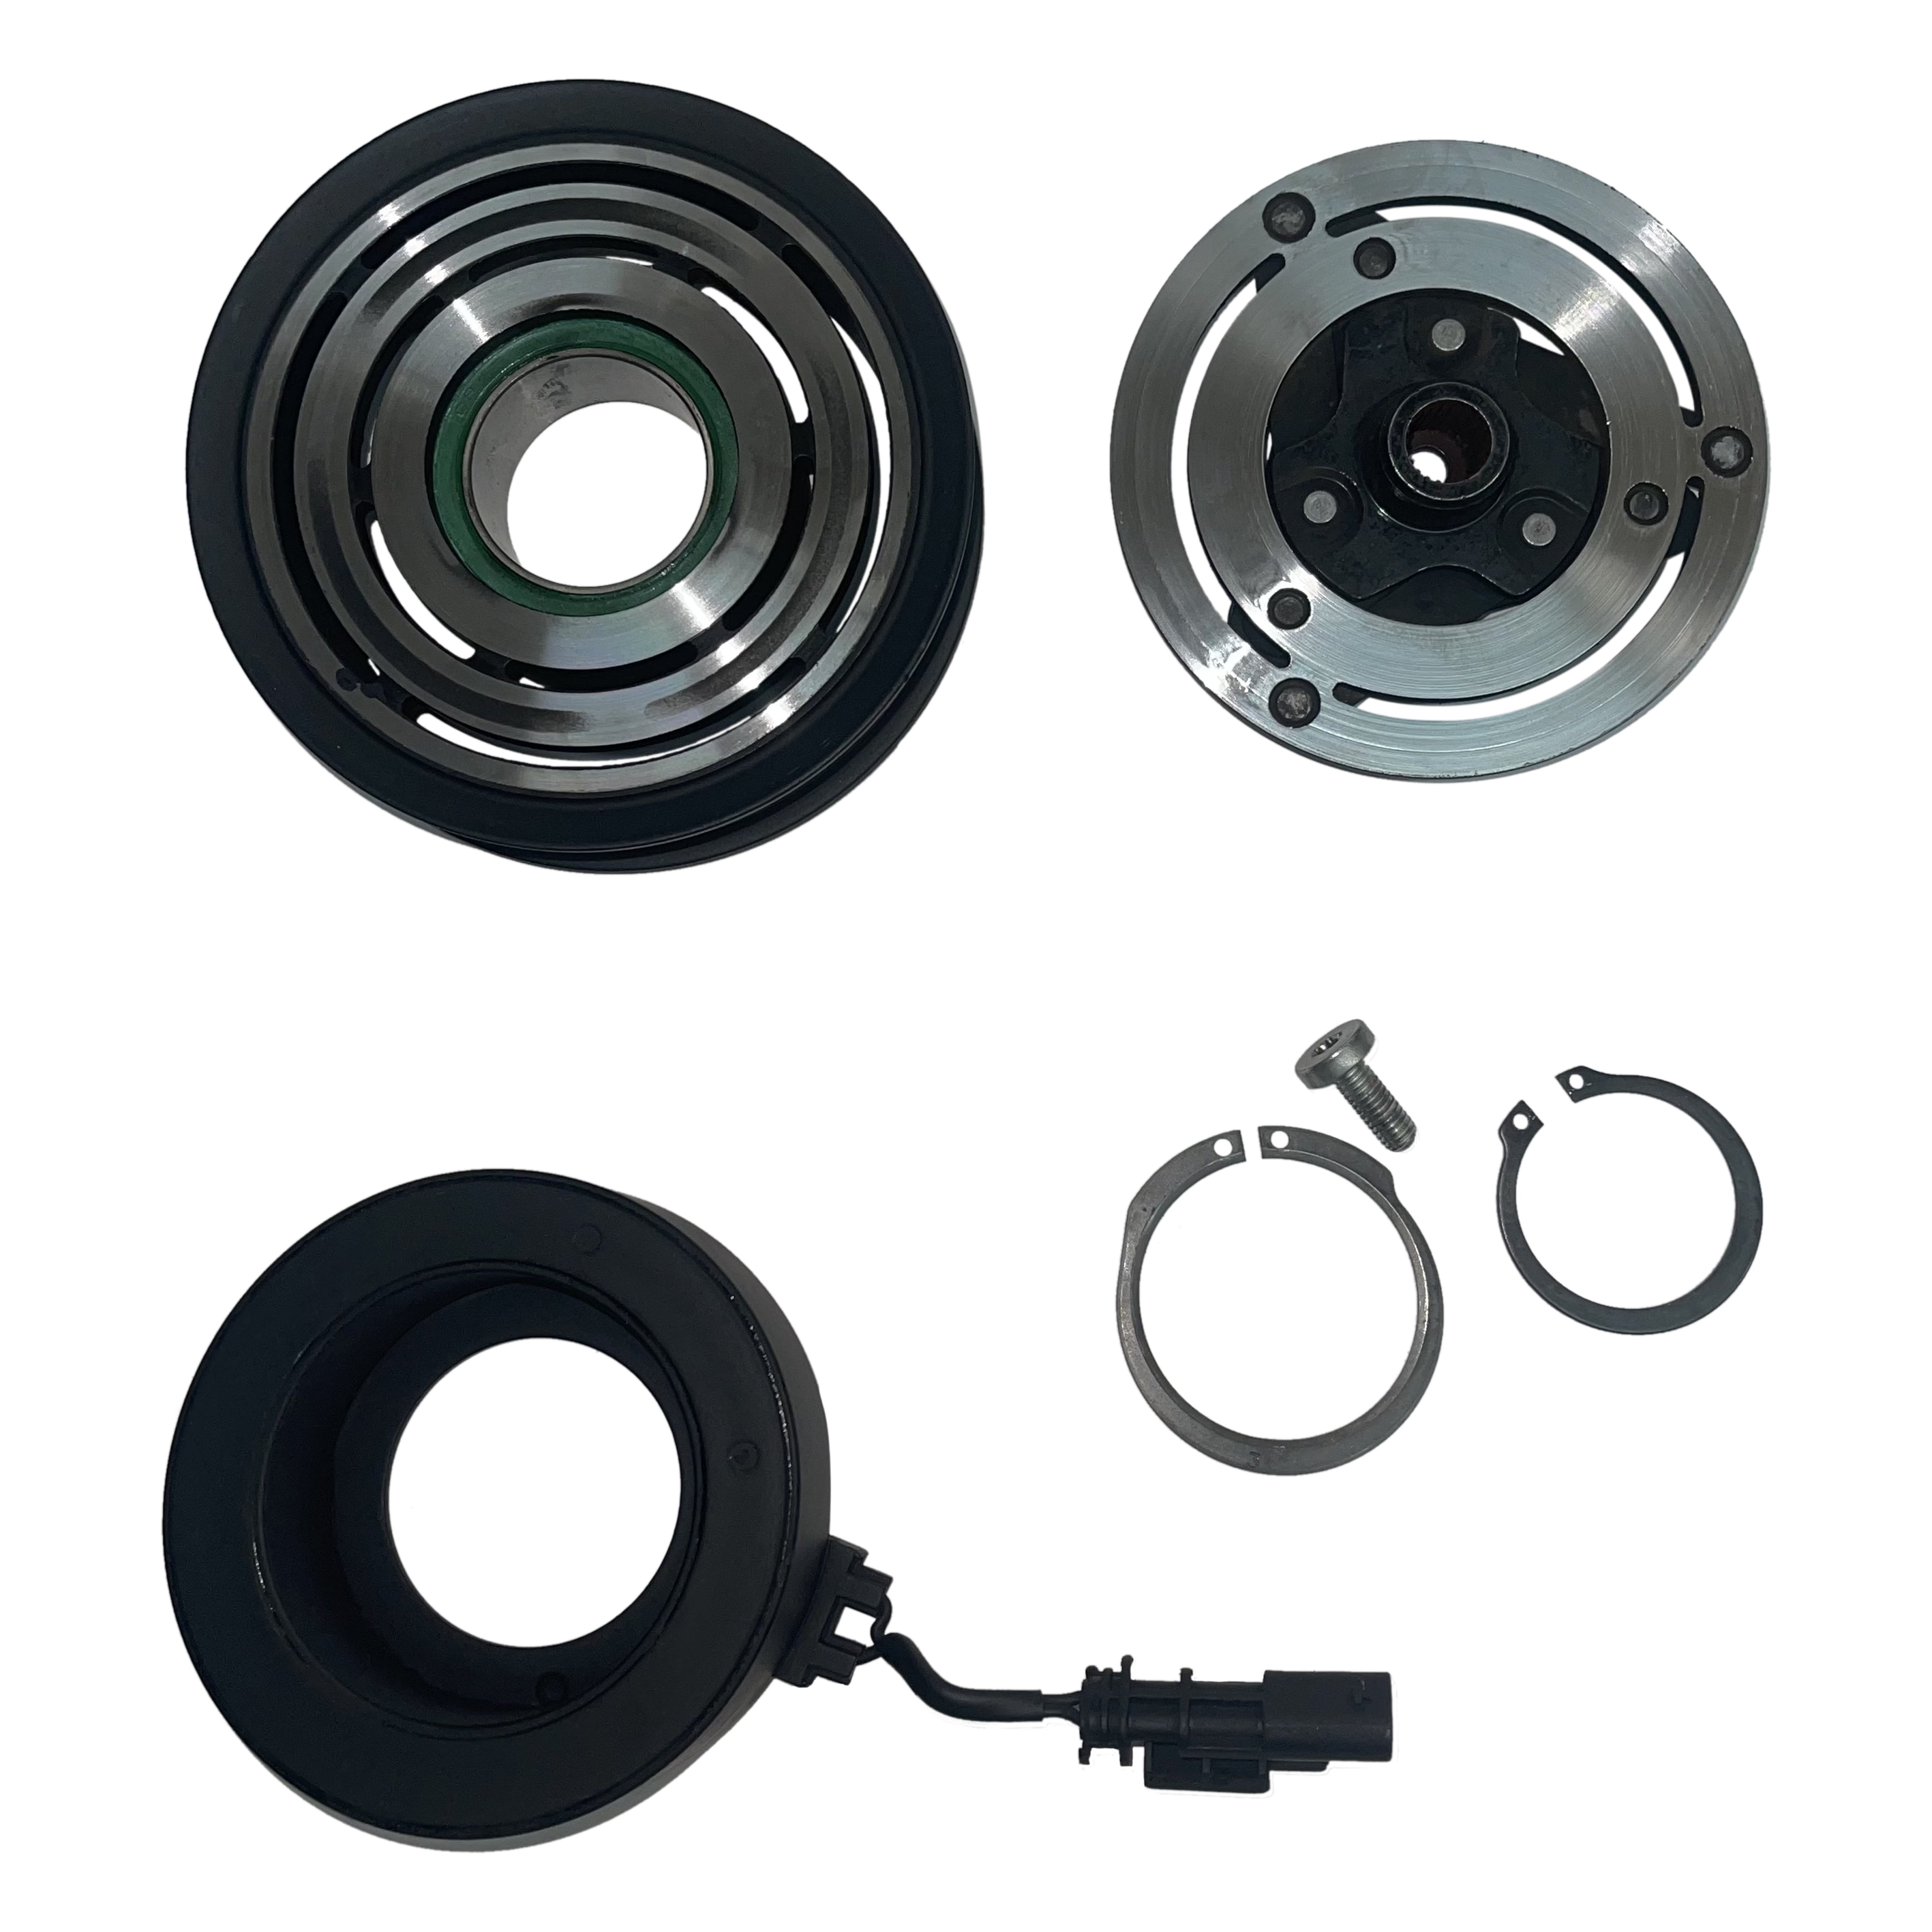 CoolTech AC Compressor Clutch KIT Coil Pulley Plate FITS 2007-2010 Ford F-250 